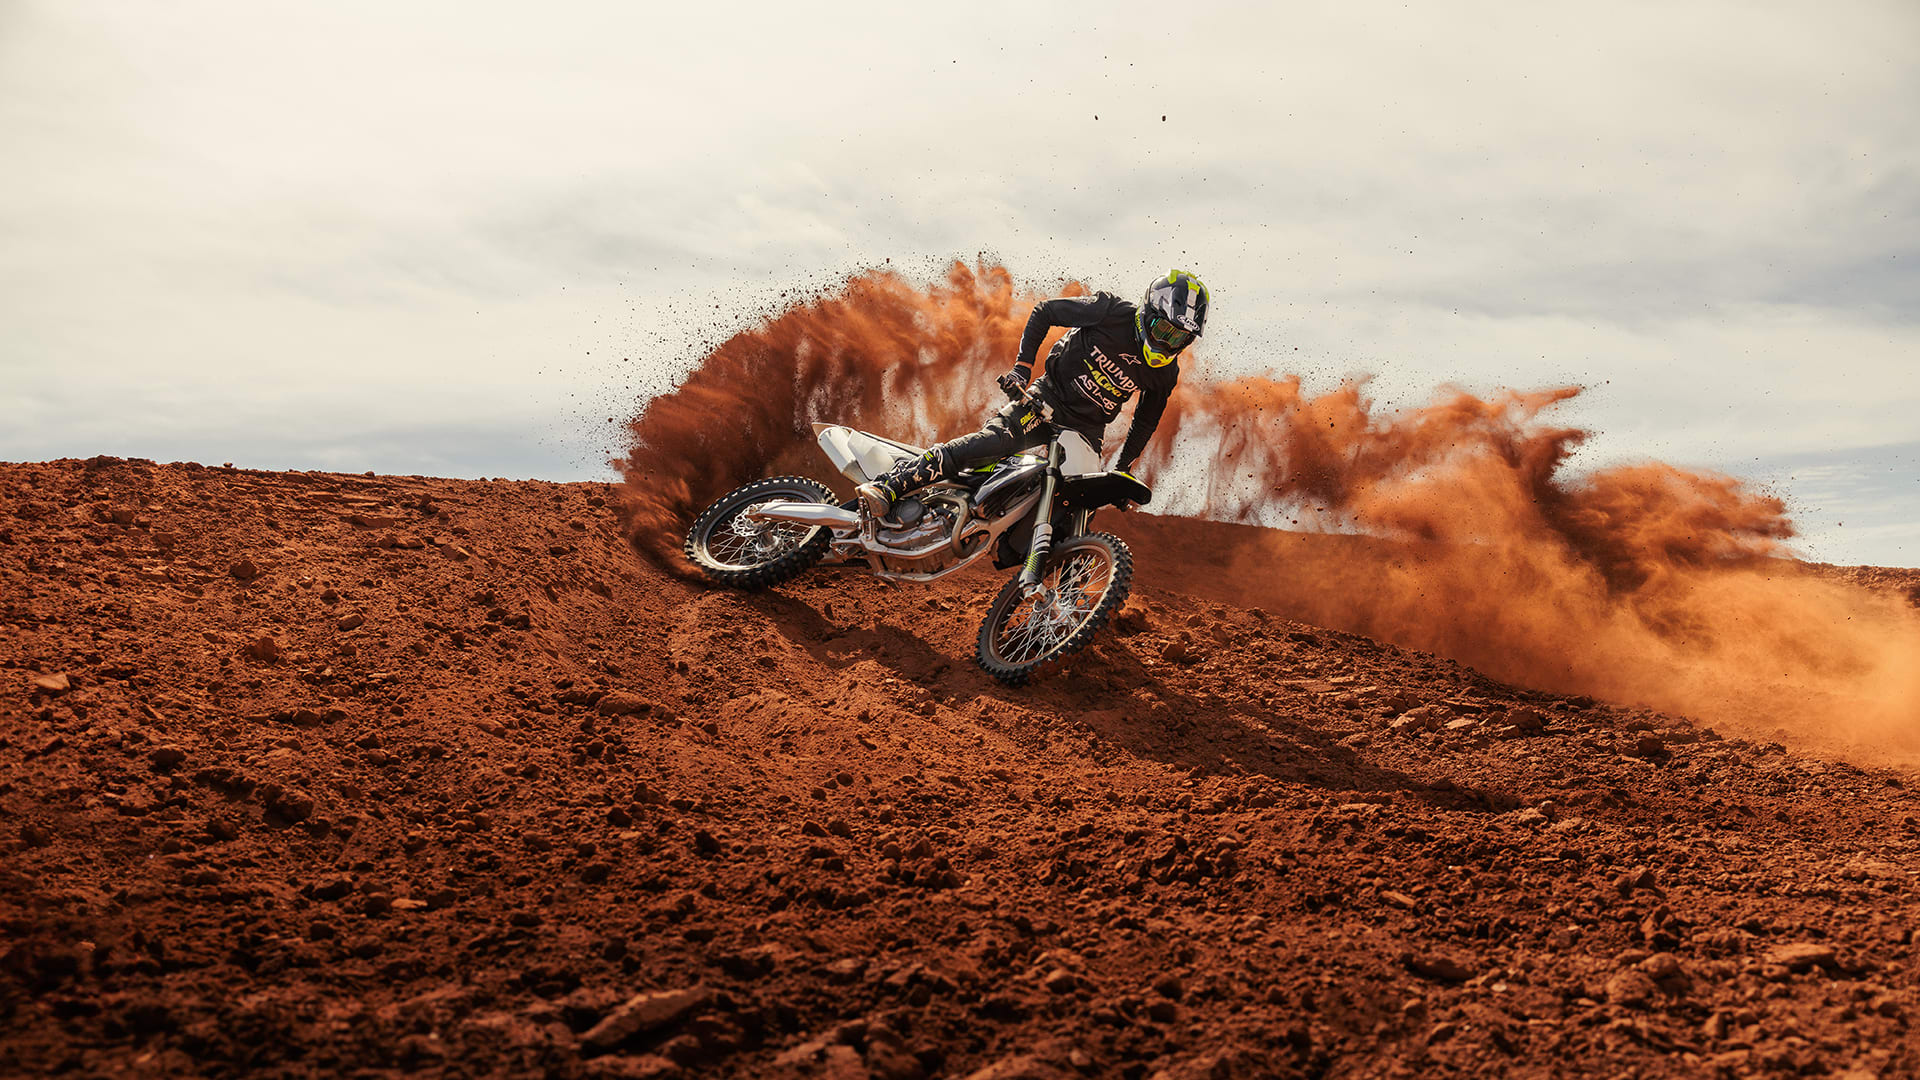 Triumph TF 250-Xs riding on Motocross track with dirt cloud